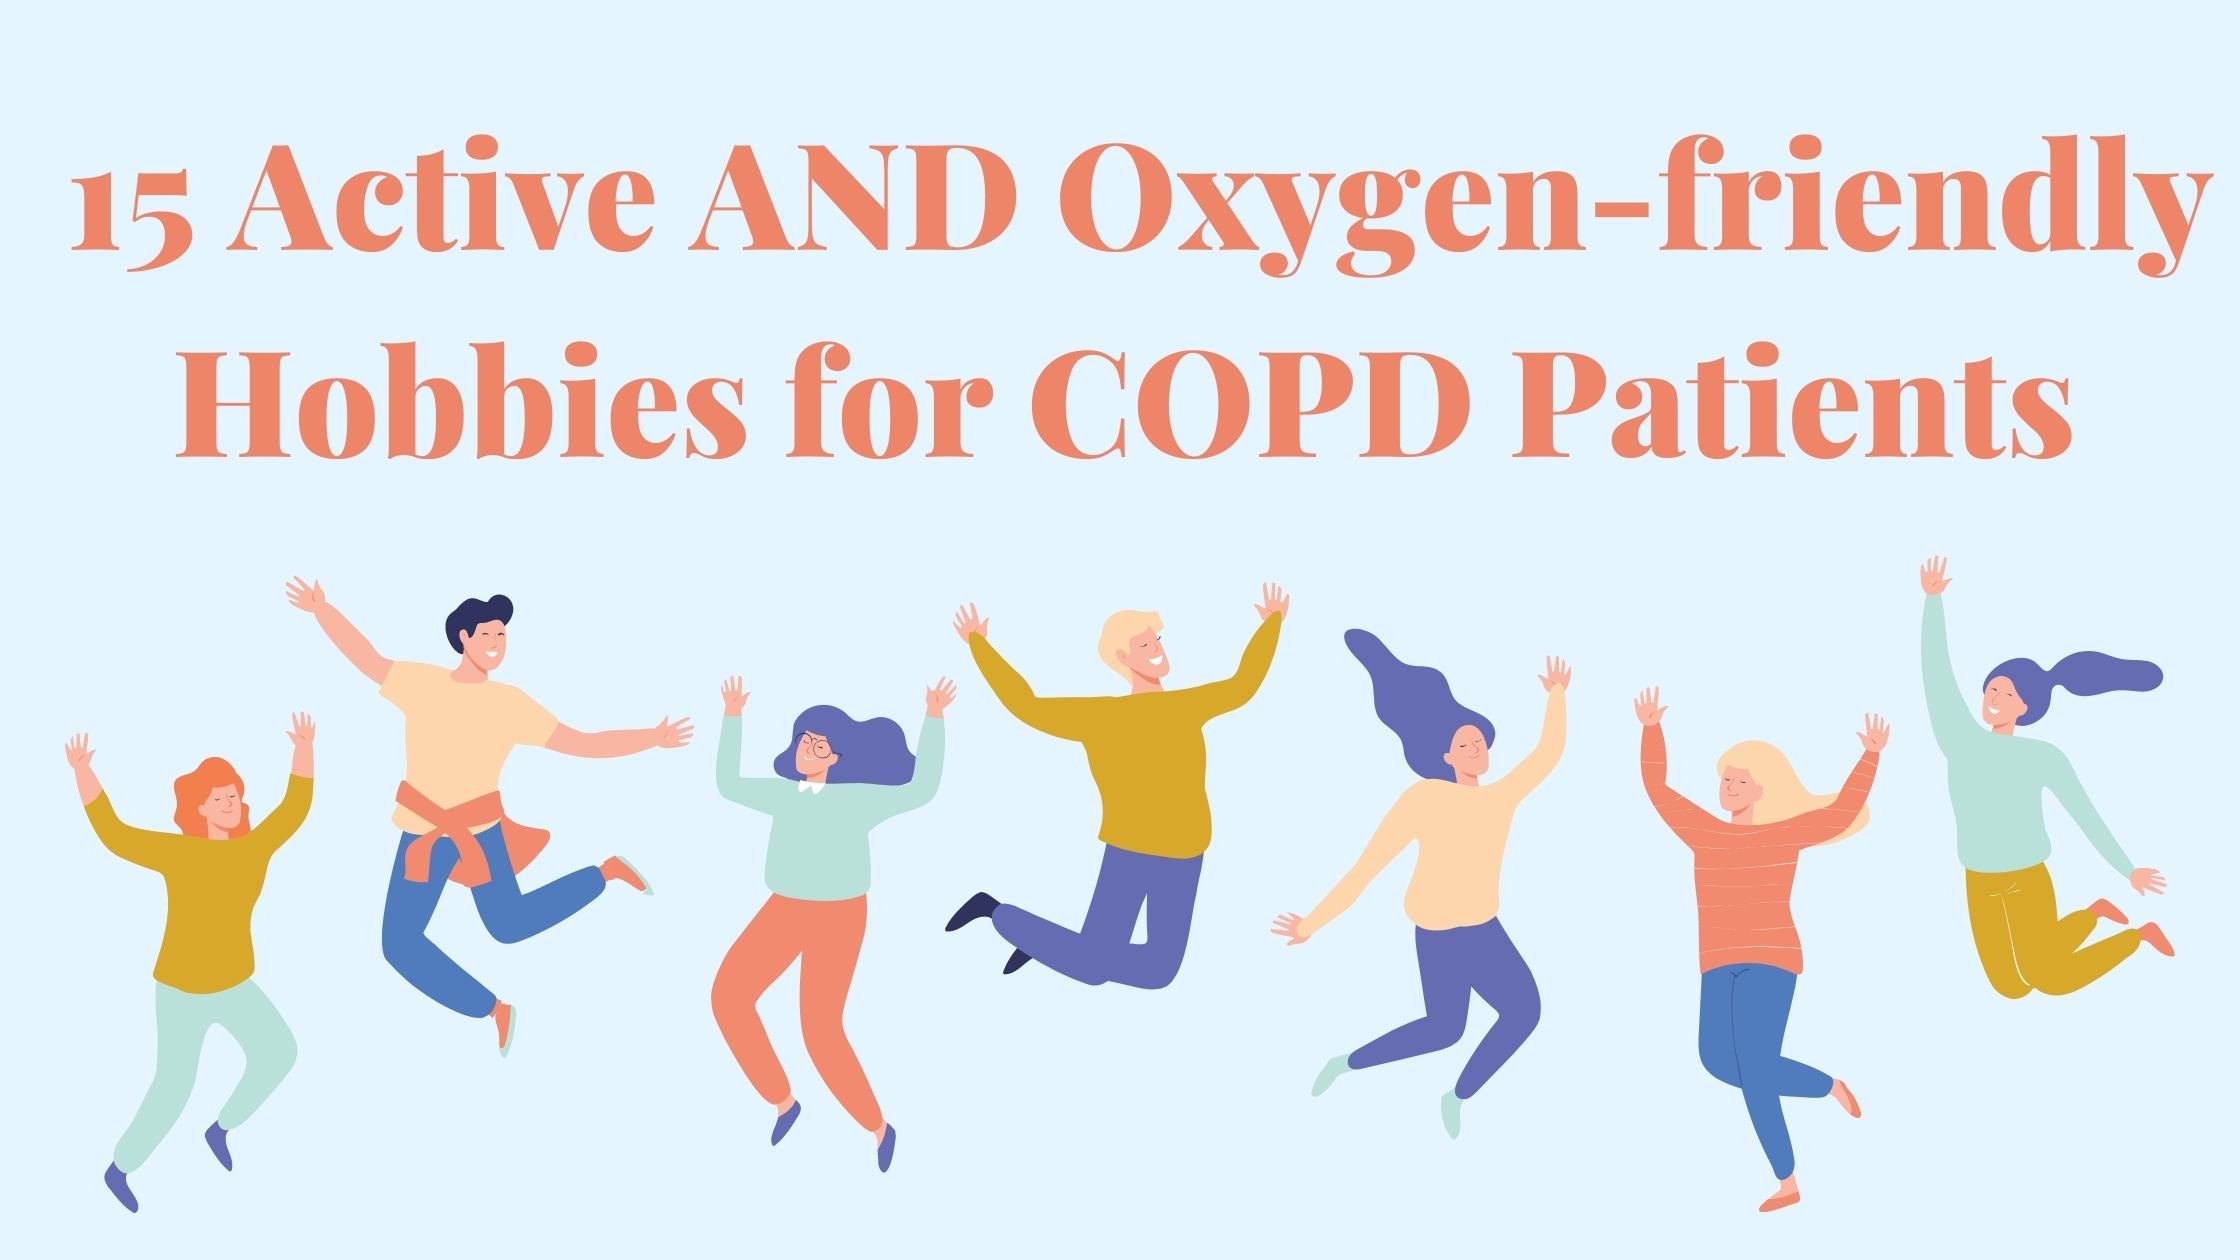 15 Active AND Oxygen-friendly Hobbies for COPD Patients